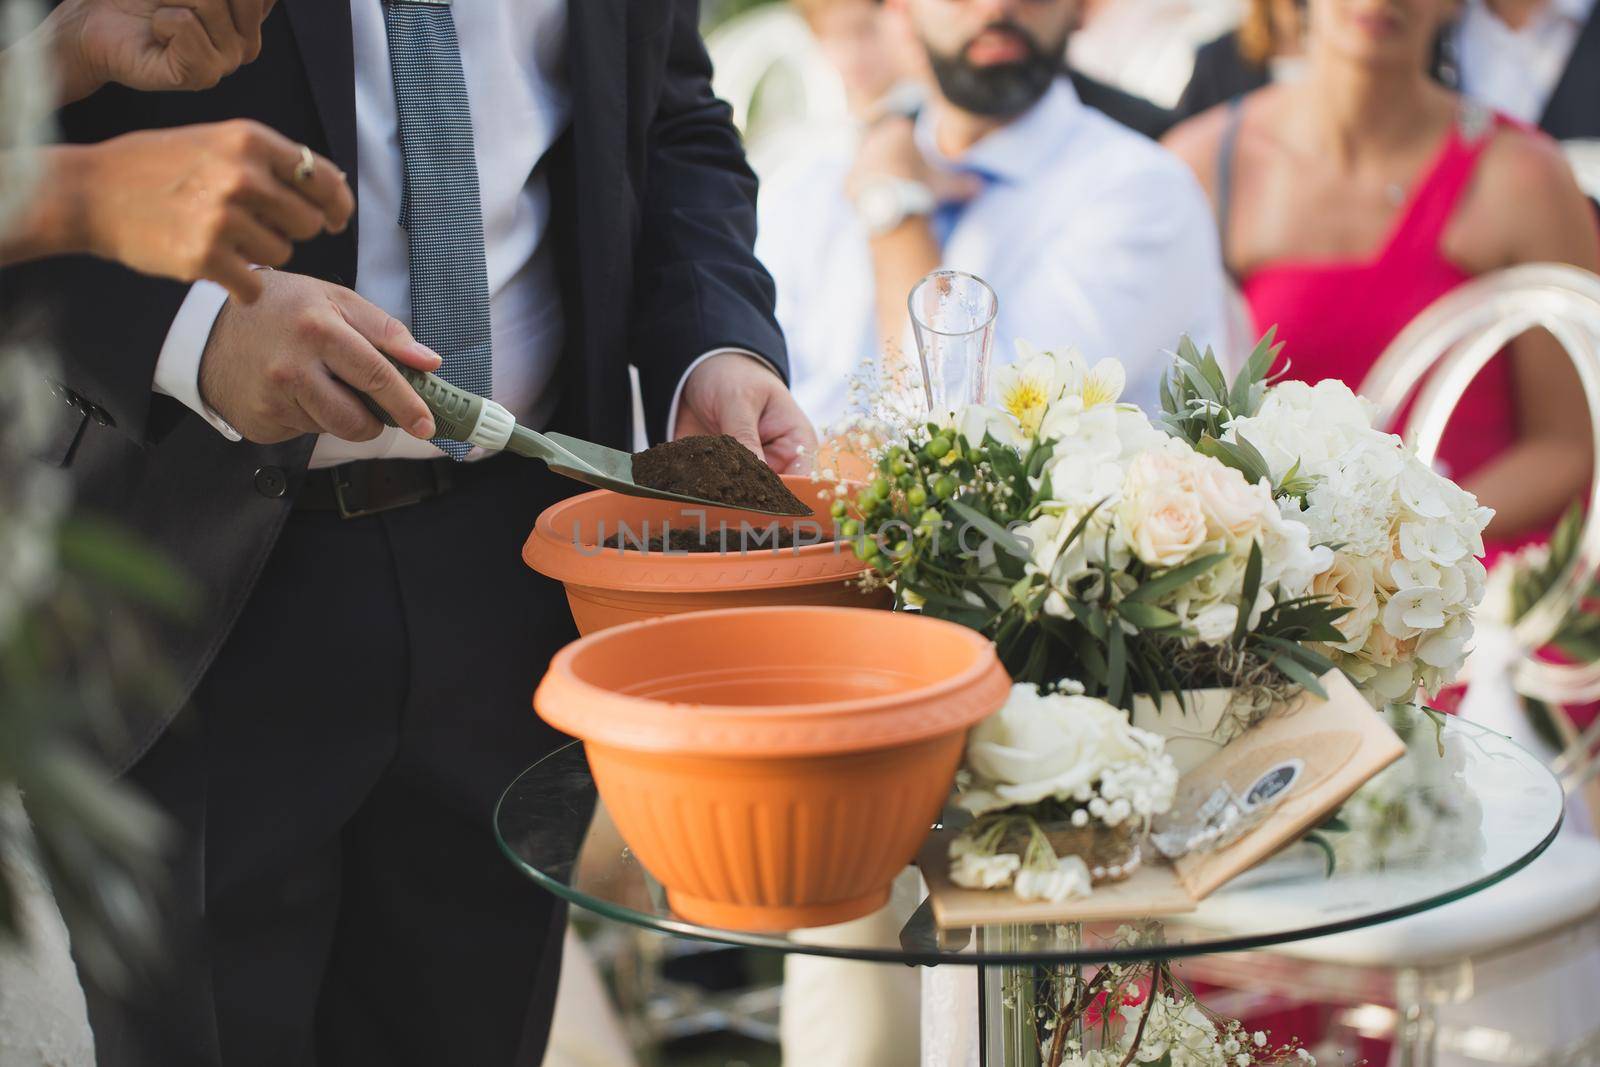 Family tradition. The bride and groom plant a plant in a pot during the wedding ceremony by StudioPeace